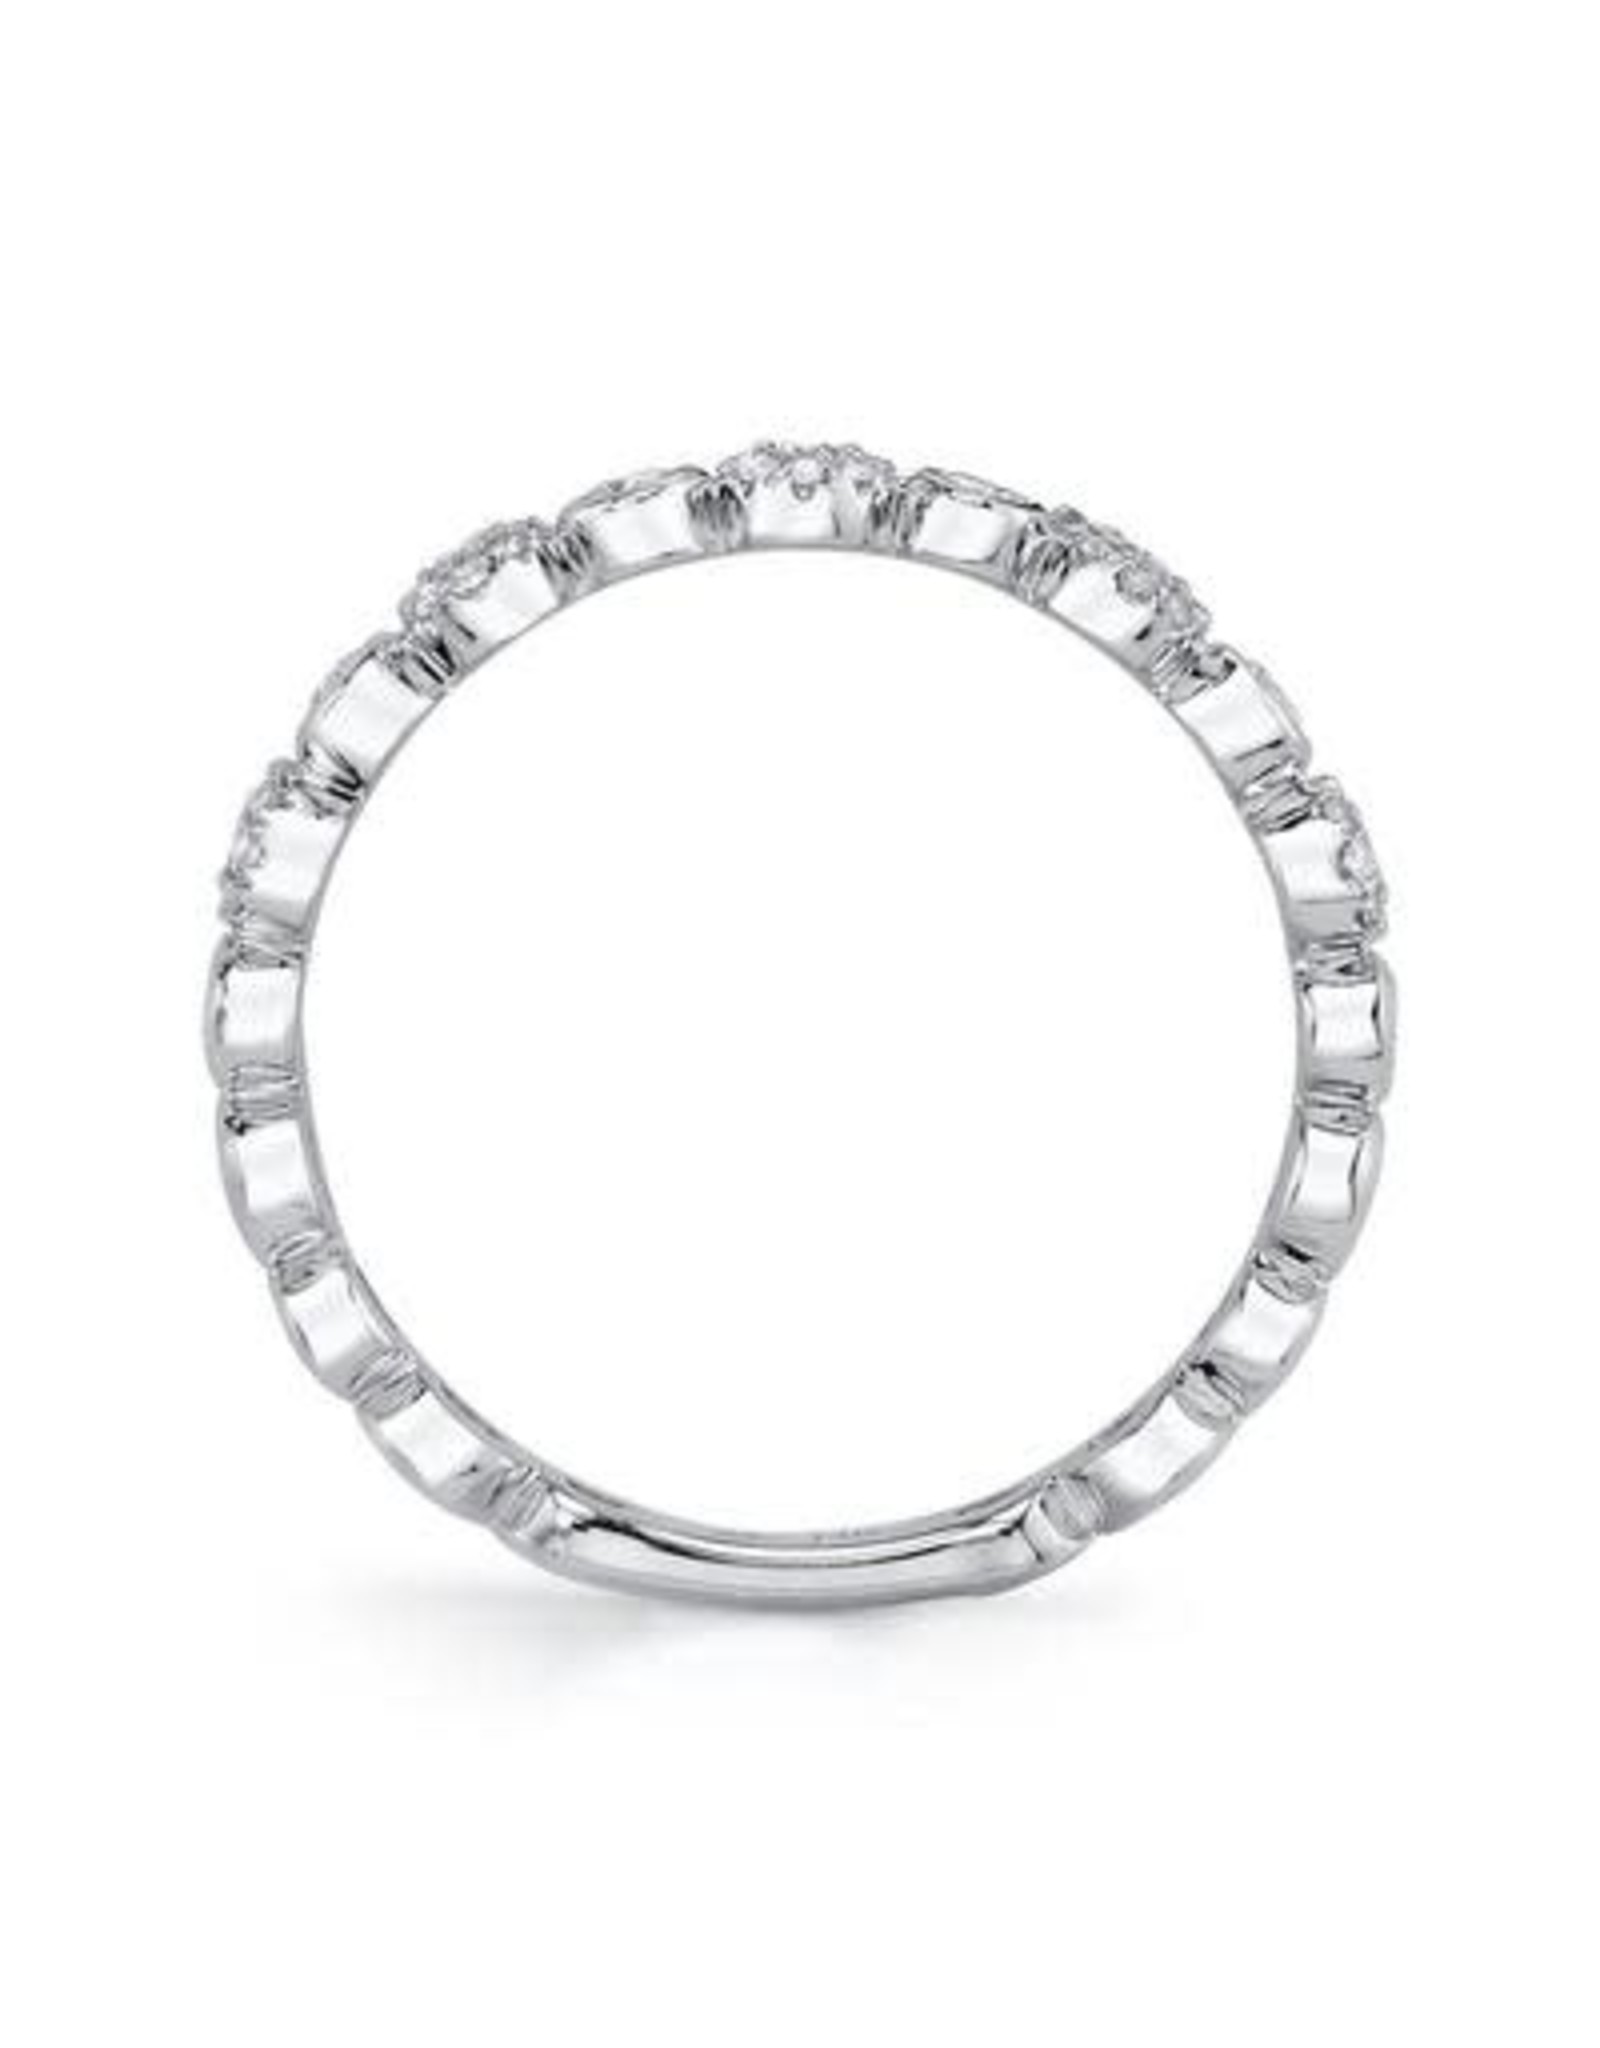 14K White Gold Diamond Stackable Ring, D: 0.22ct